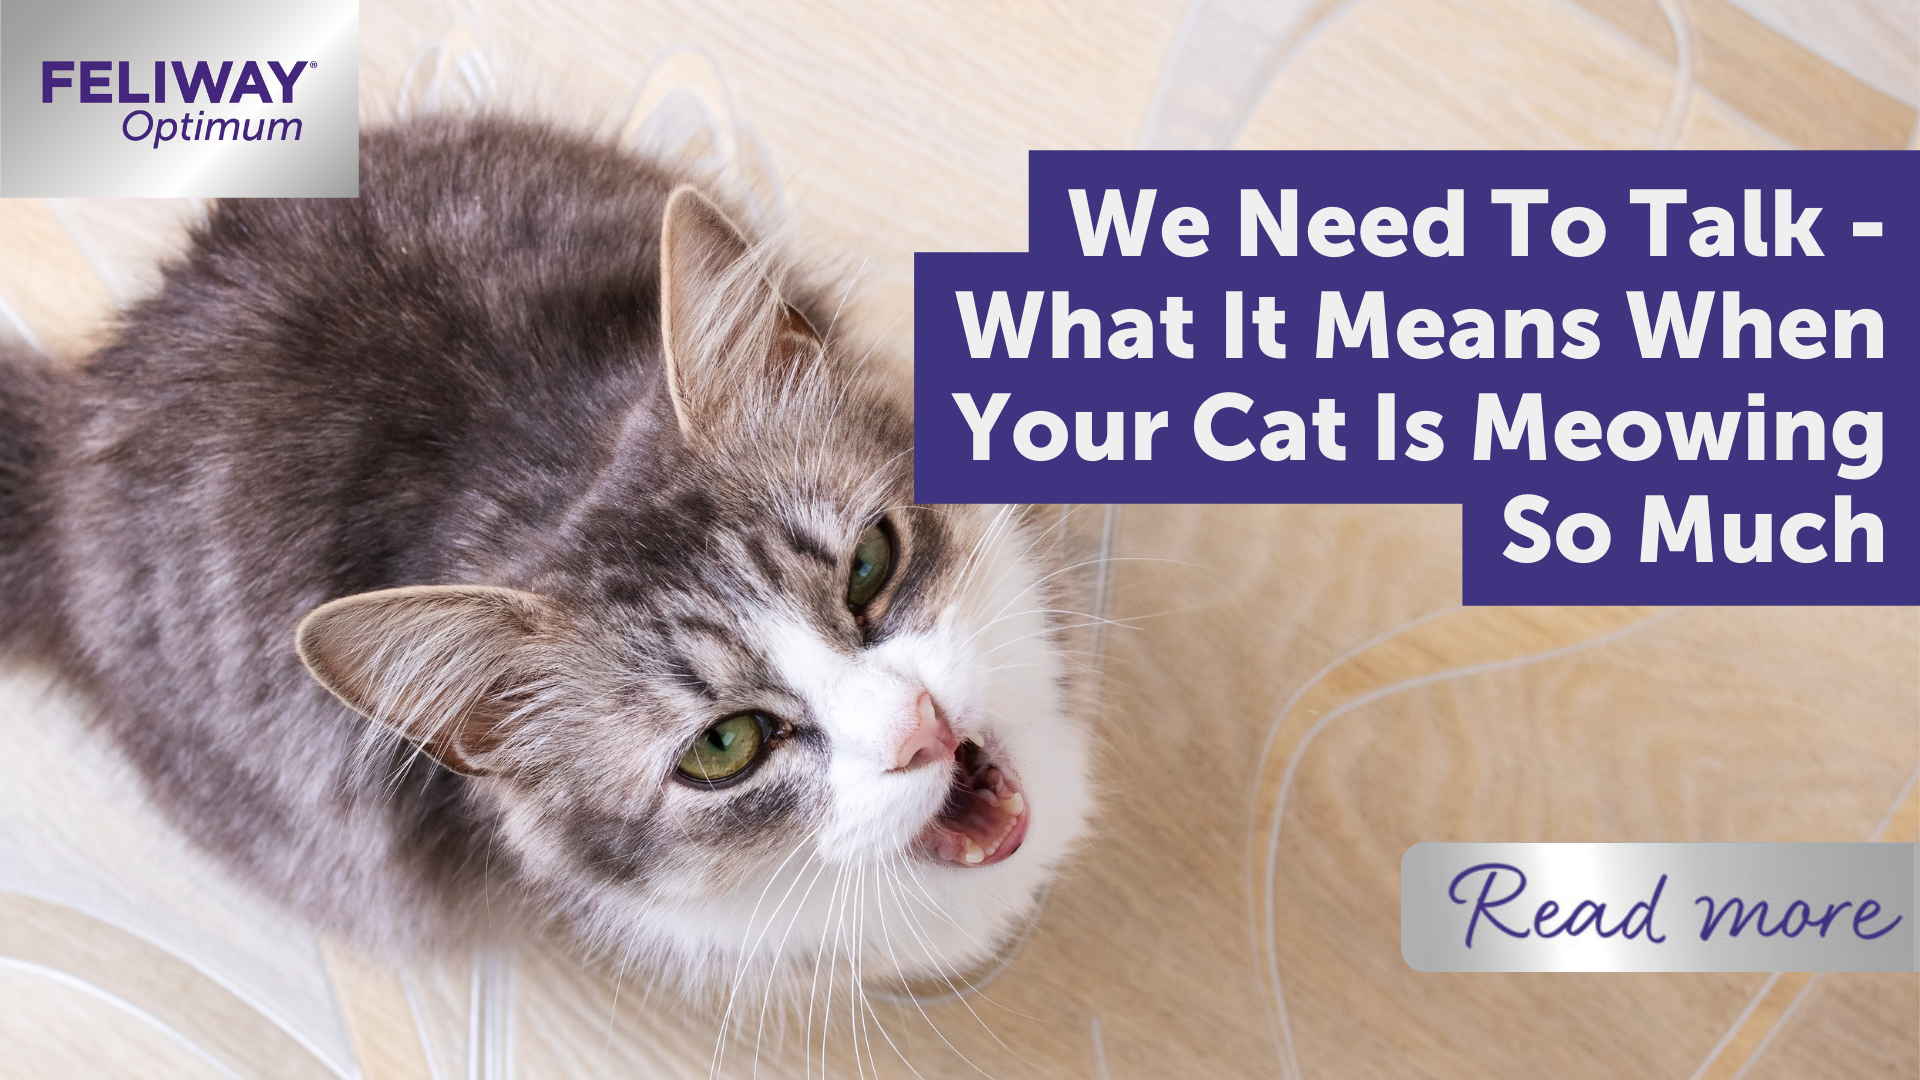 We Need To Talk - What it means when your cat is meowing so much